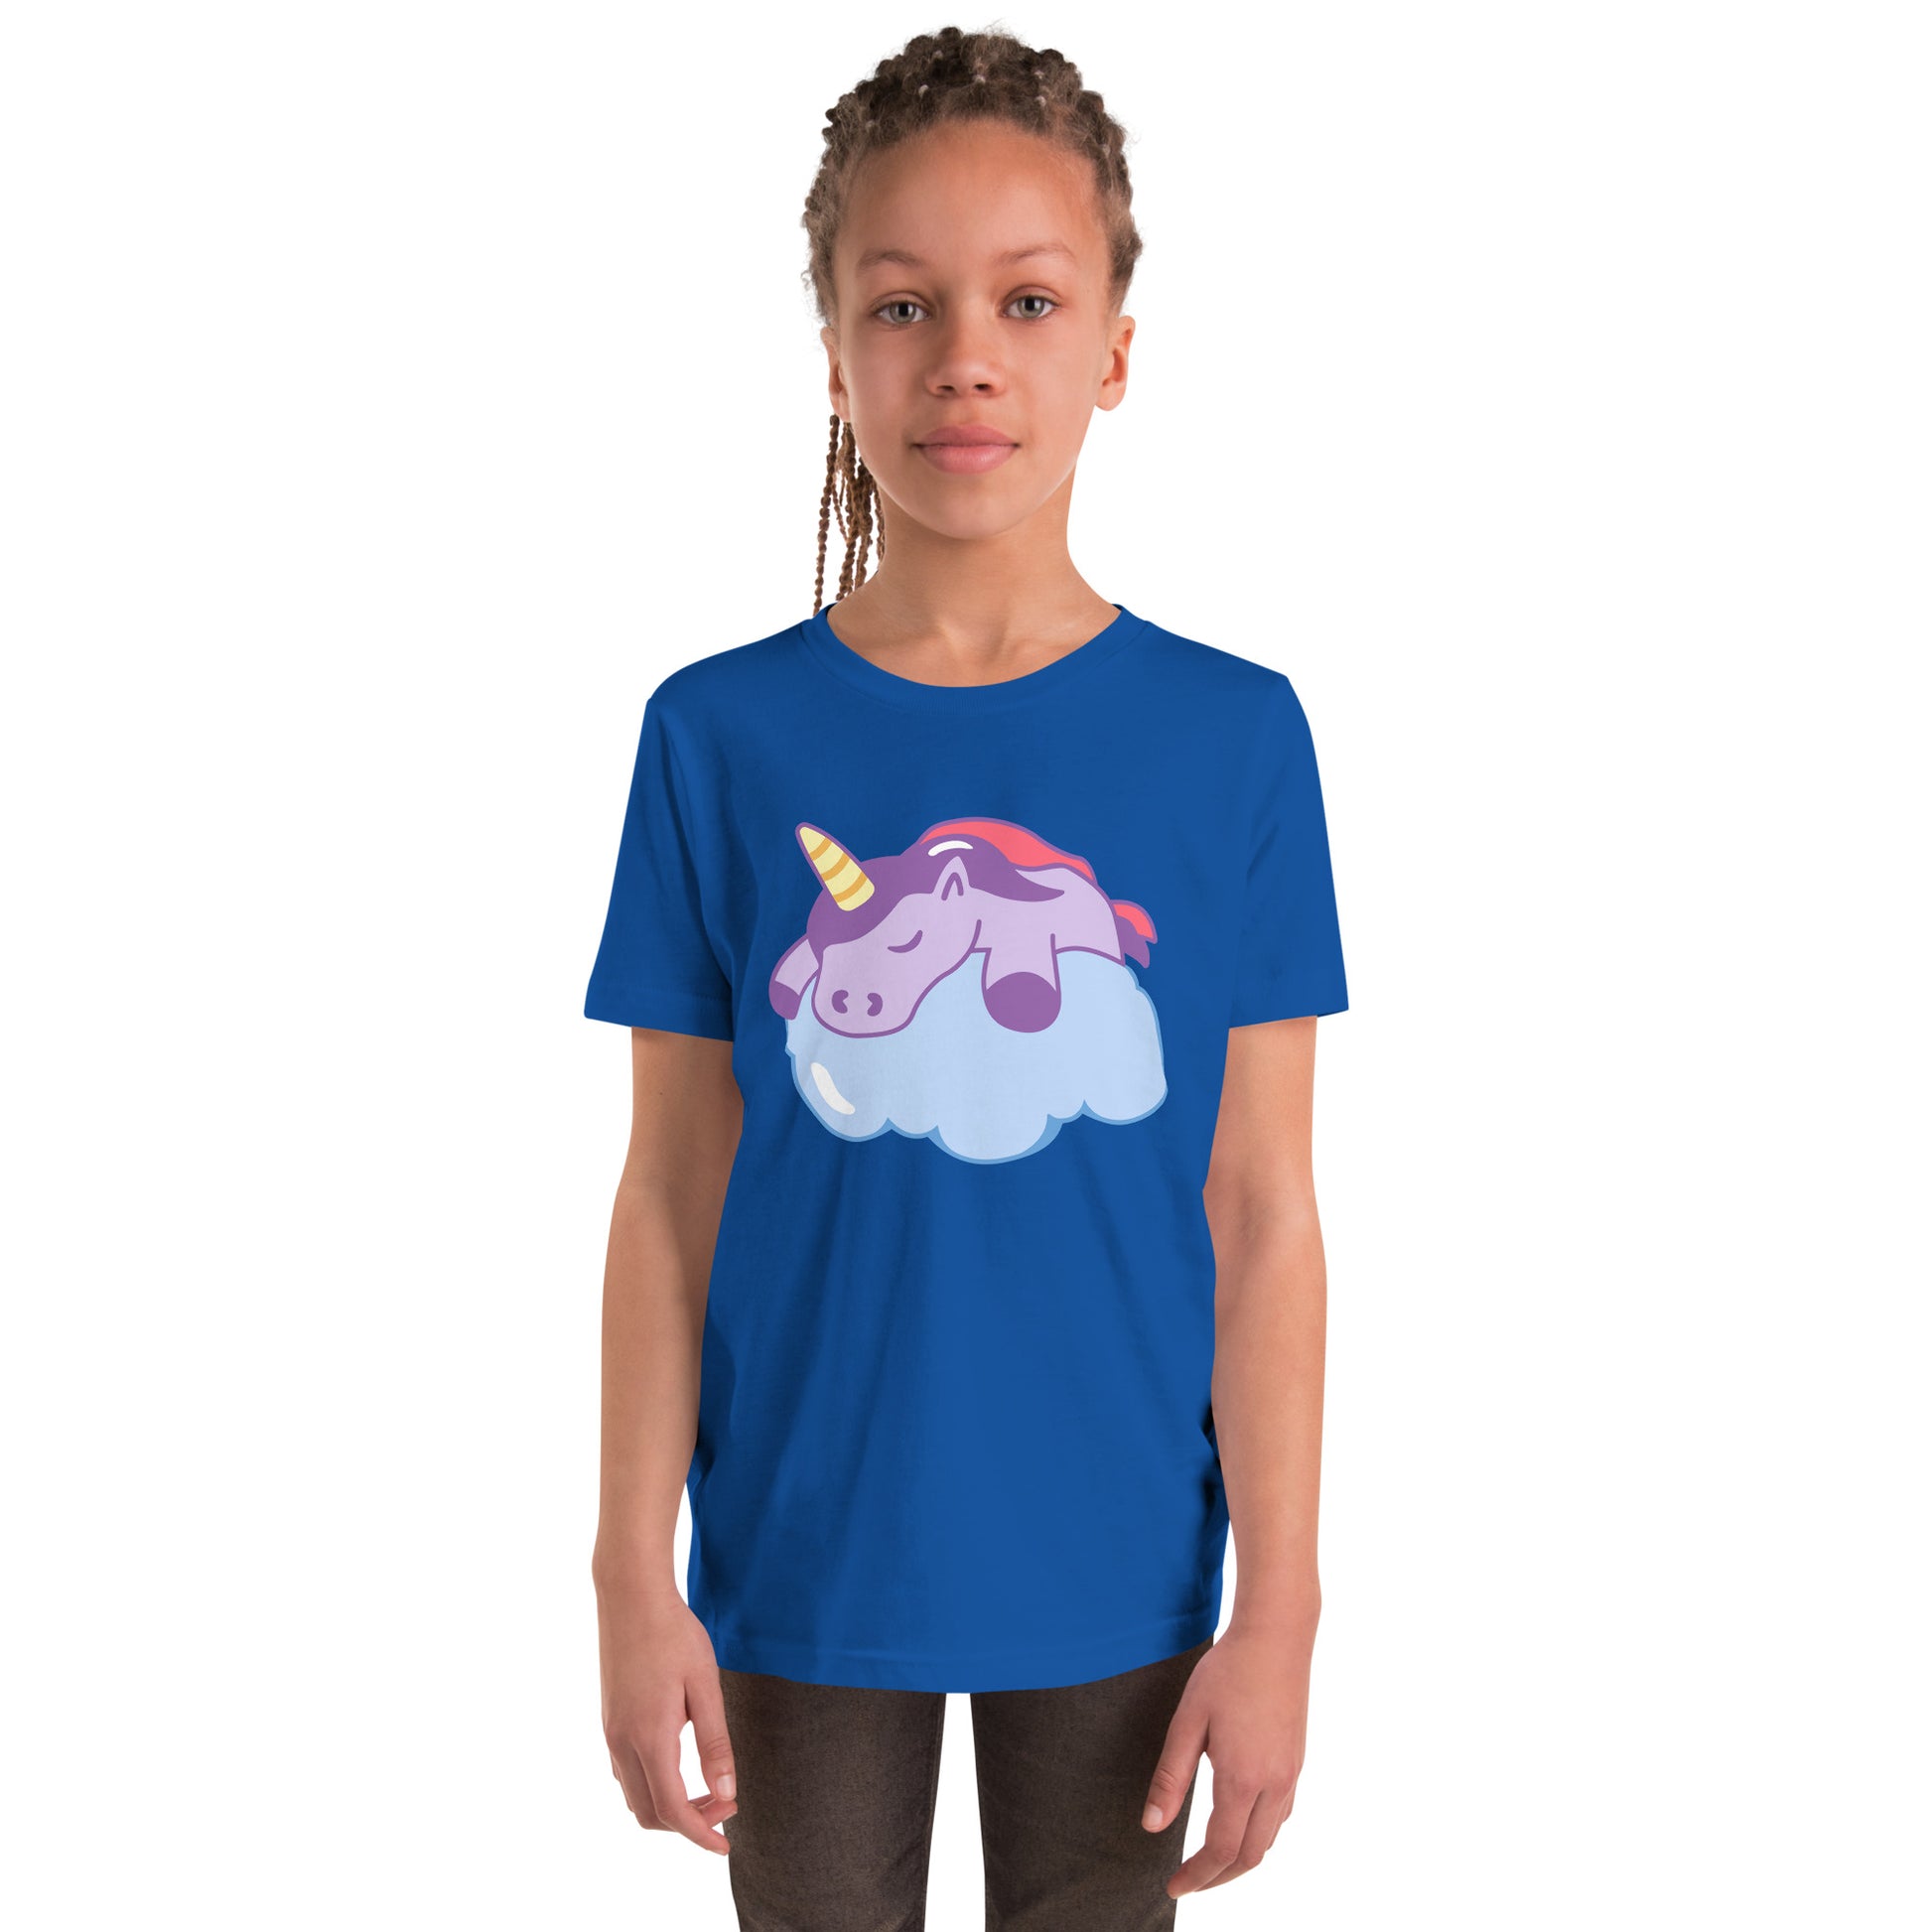 Youth with a royal blue T-shirt with a print of a sleeping unicorn on a cloud